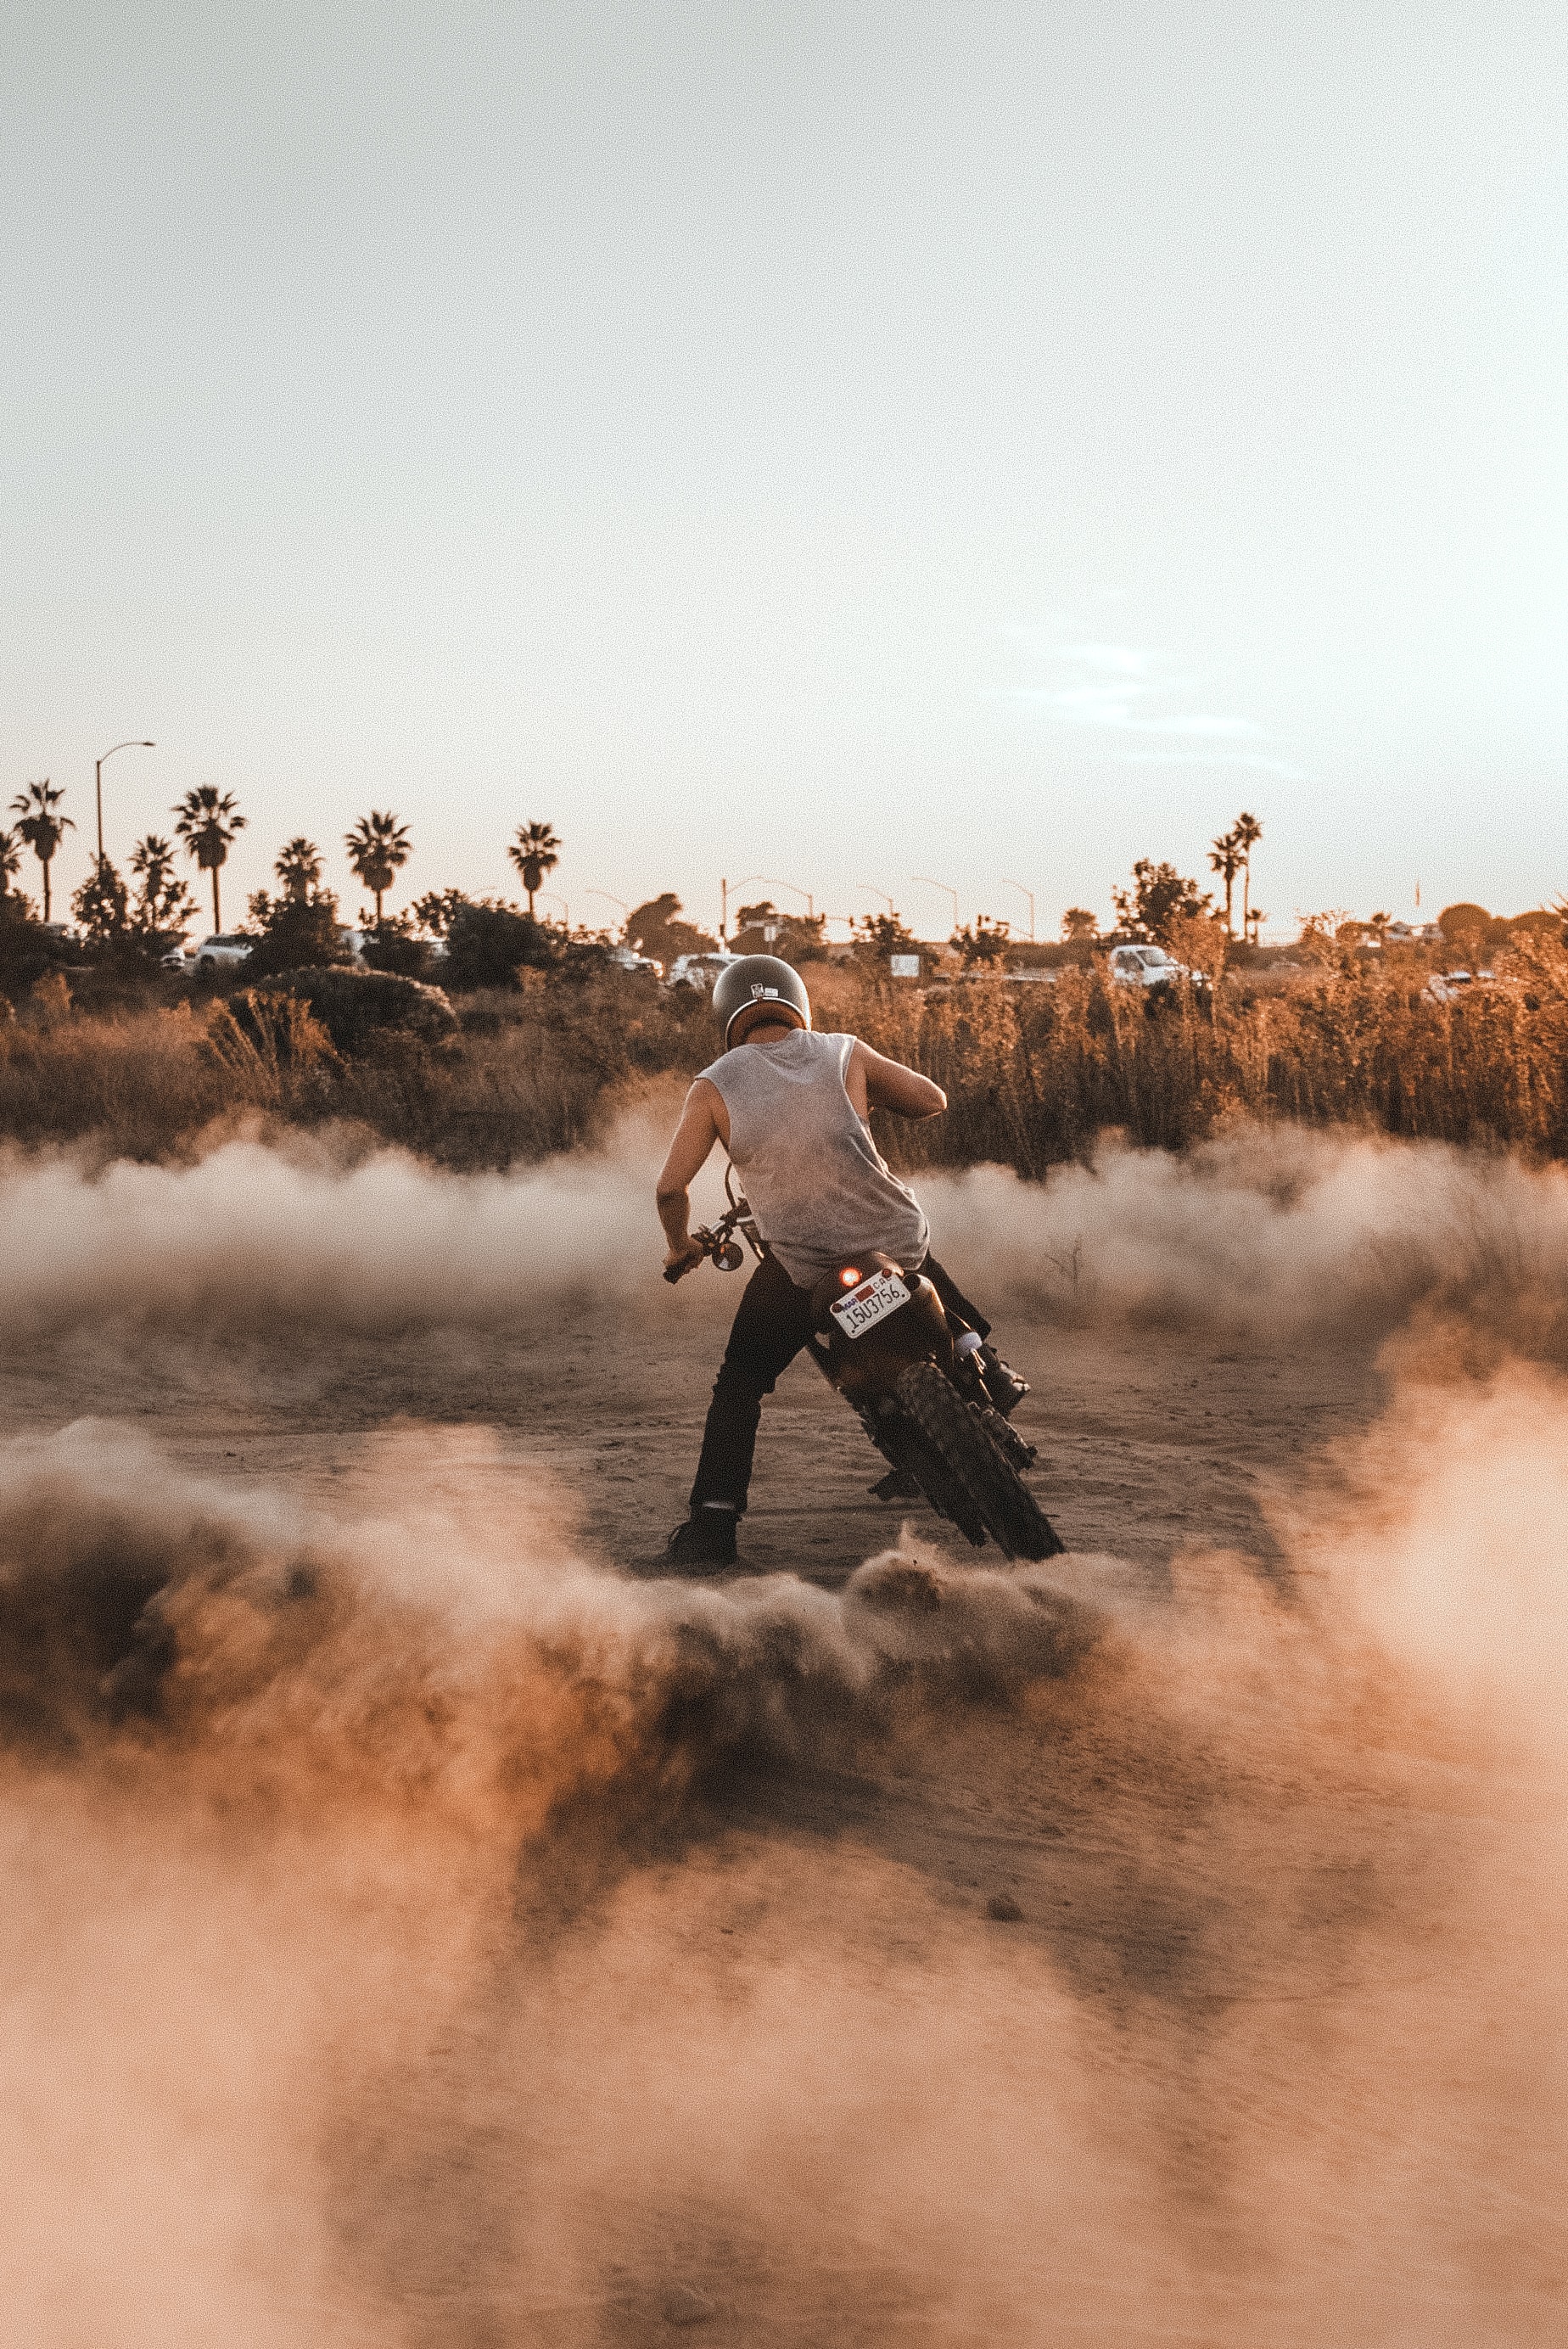 drift, motorcycles, motorcyclist, motorcycle, dust